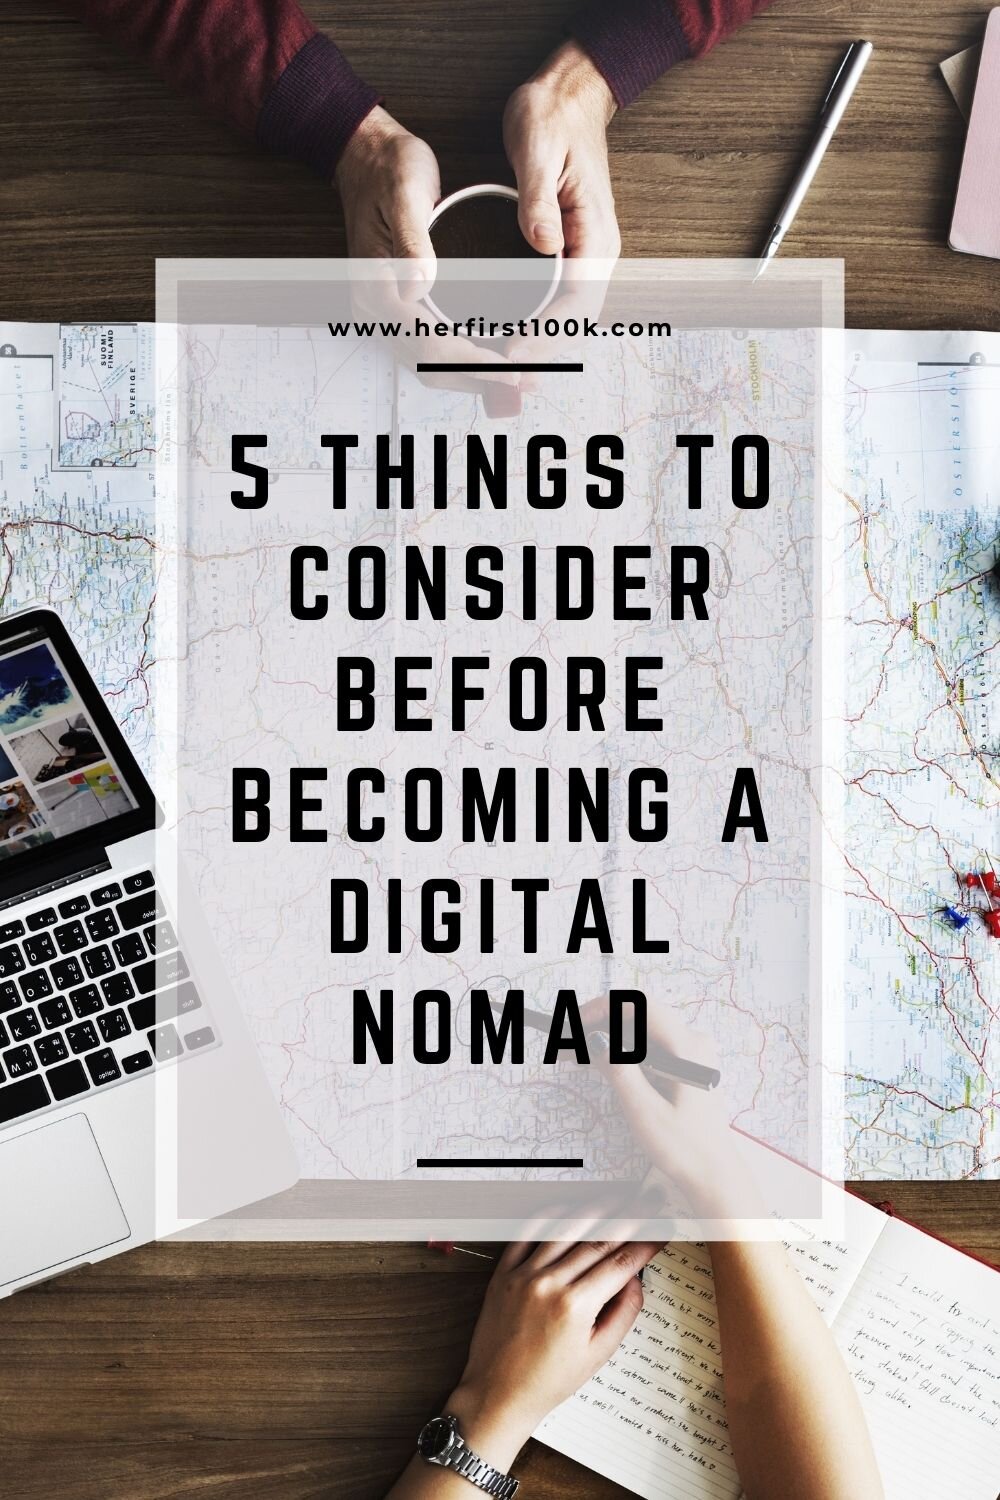 5-things-to-consider-before-becoming-digitla-nomad.jpg